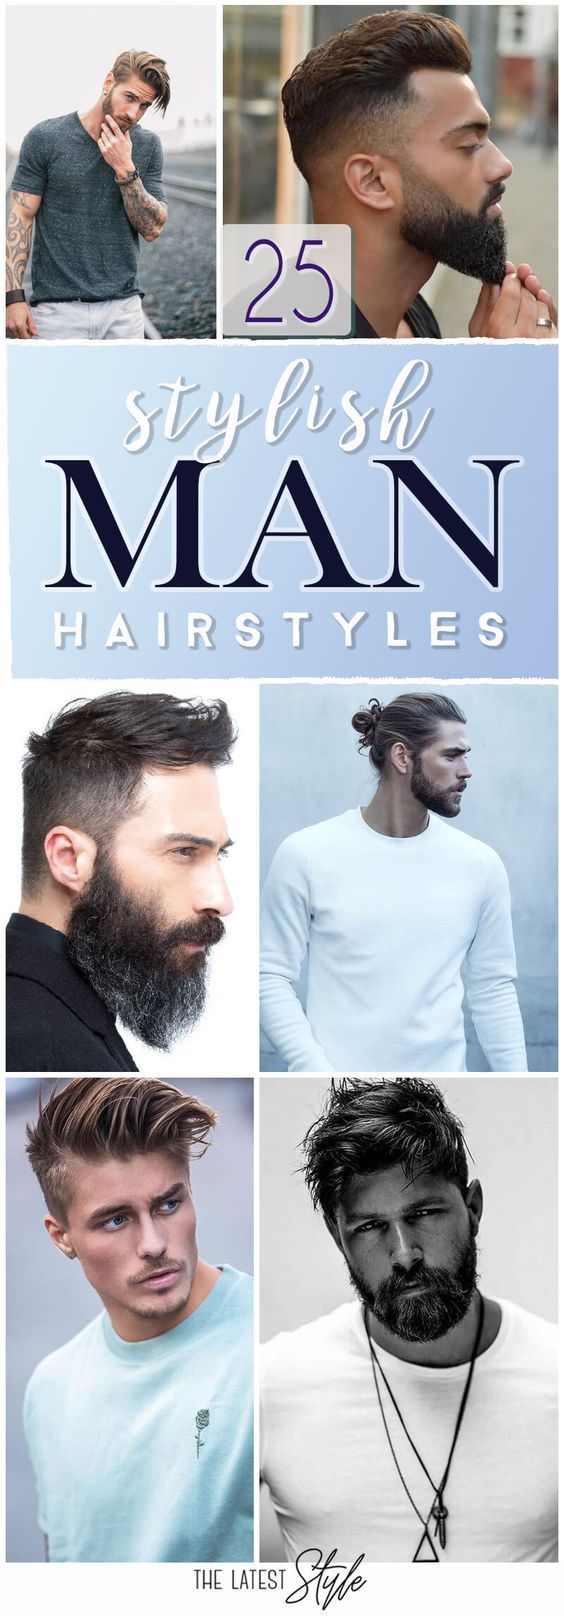 Check out these 25 man hairstyles to find a modern, stylish look for you.